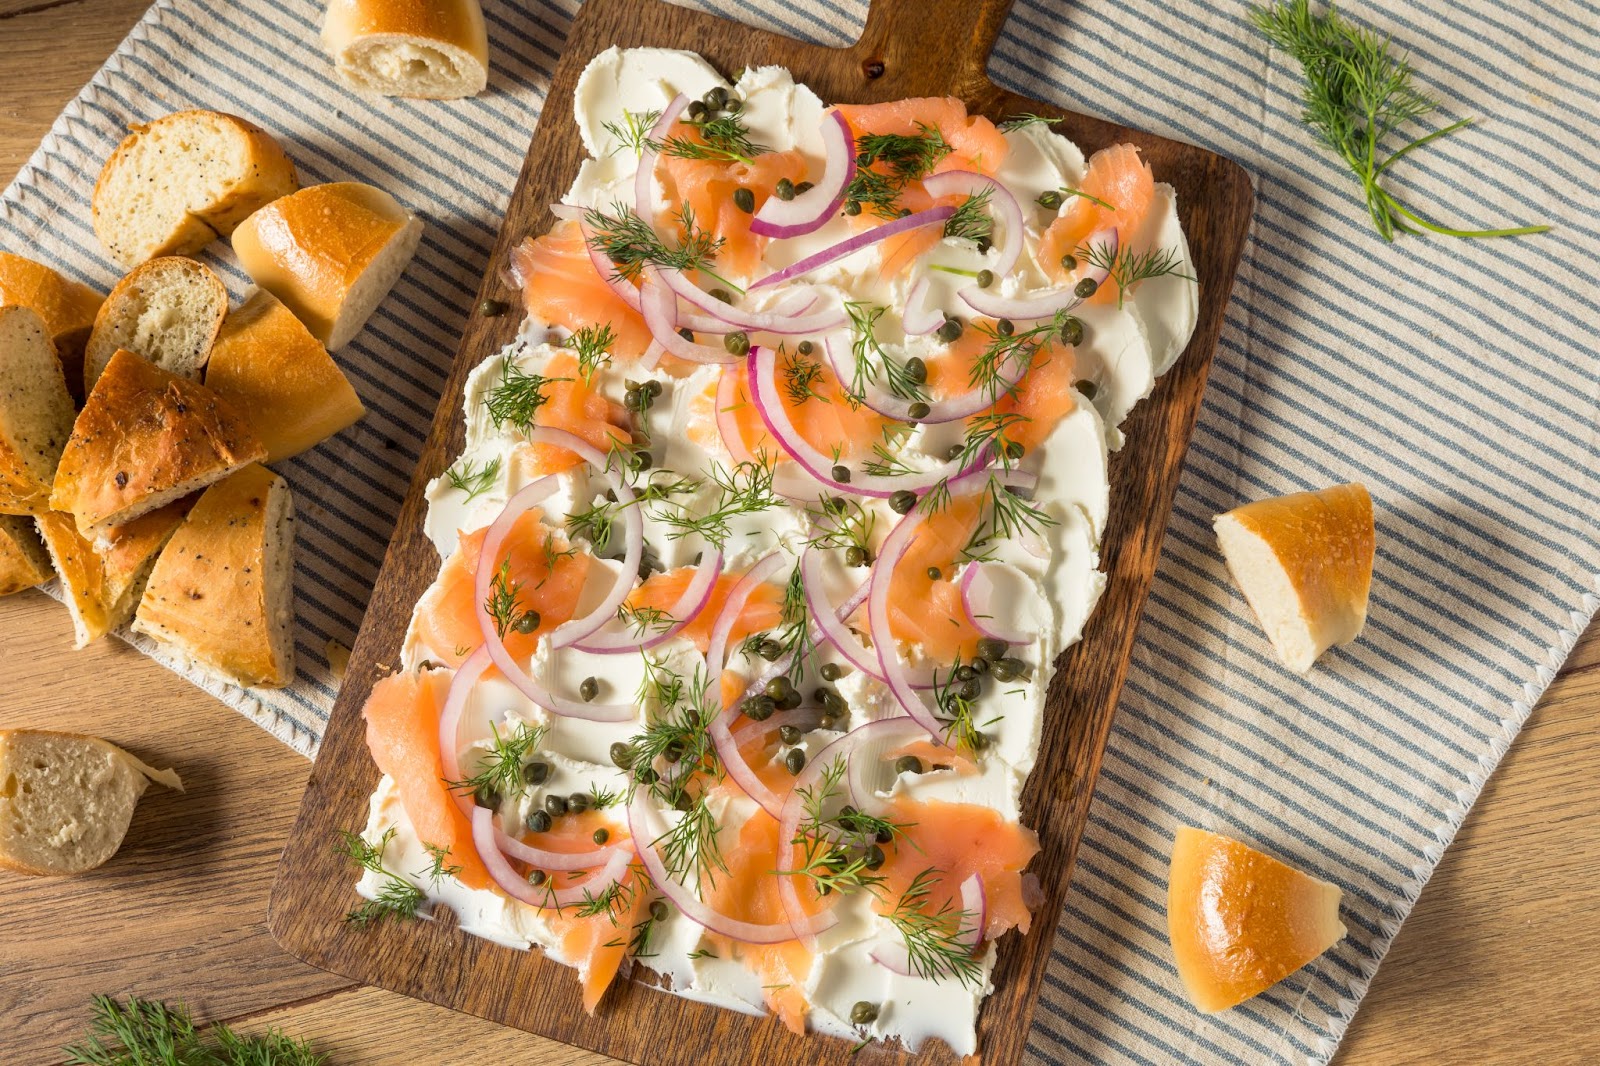 A close-up photo of a wooden cutting board topped with cream cheese, lox, onion, capers and dill. This bagel and lox bliss board is one of many great Breakfast and Brunch Board Presentation Ideas.